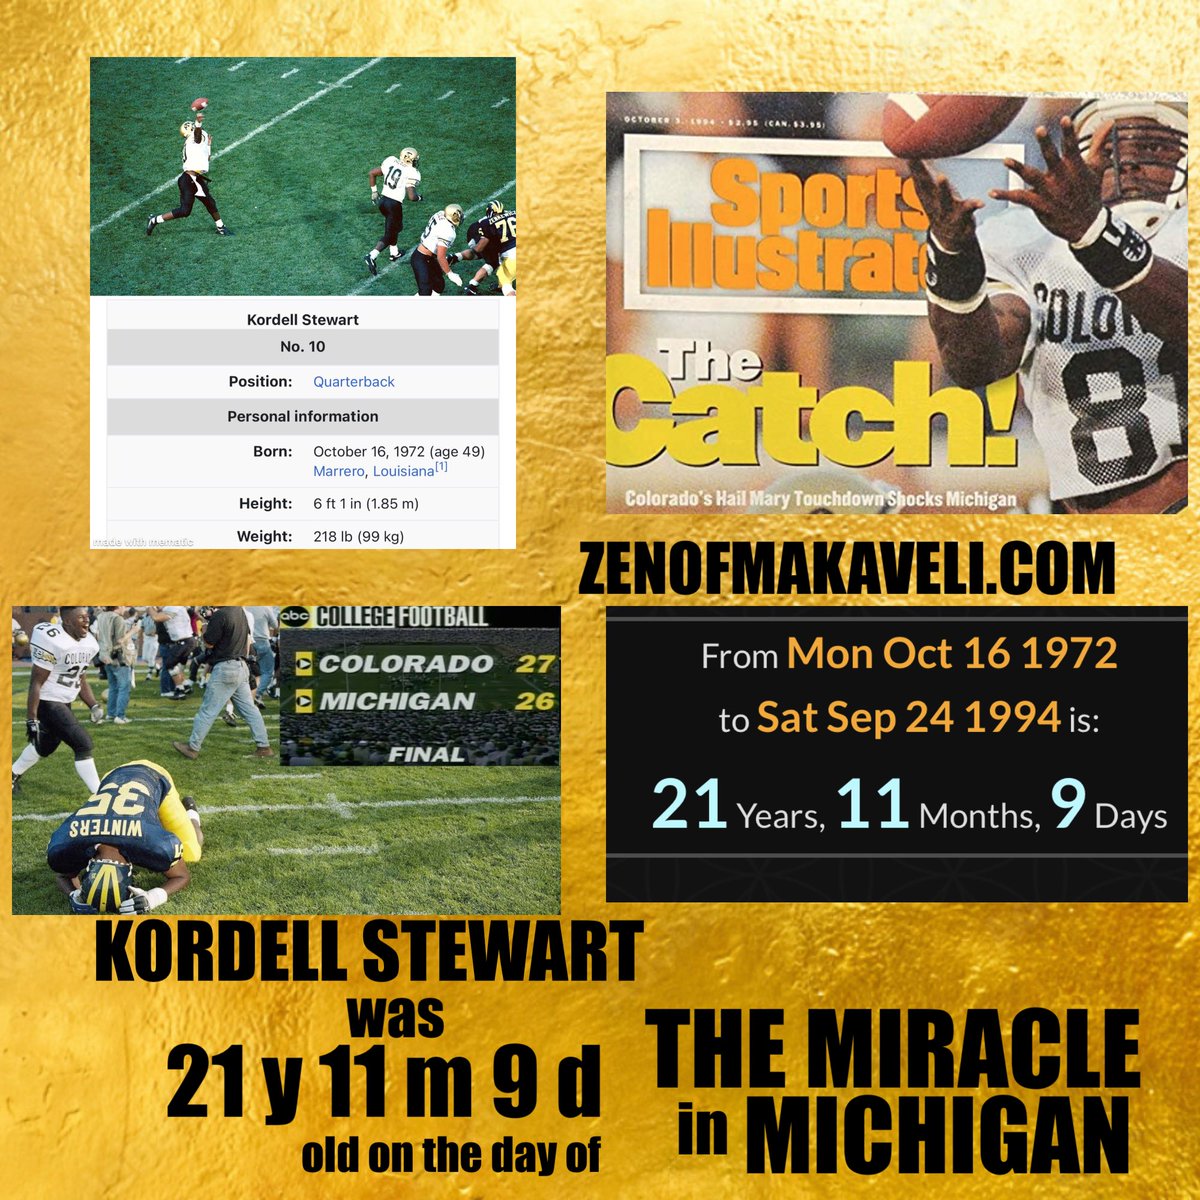 This is personally one of my favorite finds ever. YouTube this play ⬇️ #AMAZING @KSlash10 was exactly 21 y 11 m 9 d old on the day of the #MIRACLEinMICHIGAN HAIL MARY play. Imo greatest Hail Mary play ever. 21 11 9 🪞 9/11/2oo1 🔥 youtu.be/6ocm9HrZPB0 @CoachNeuheisel